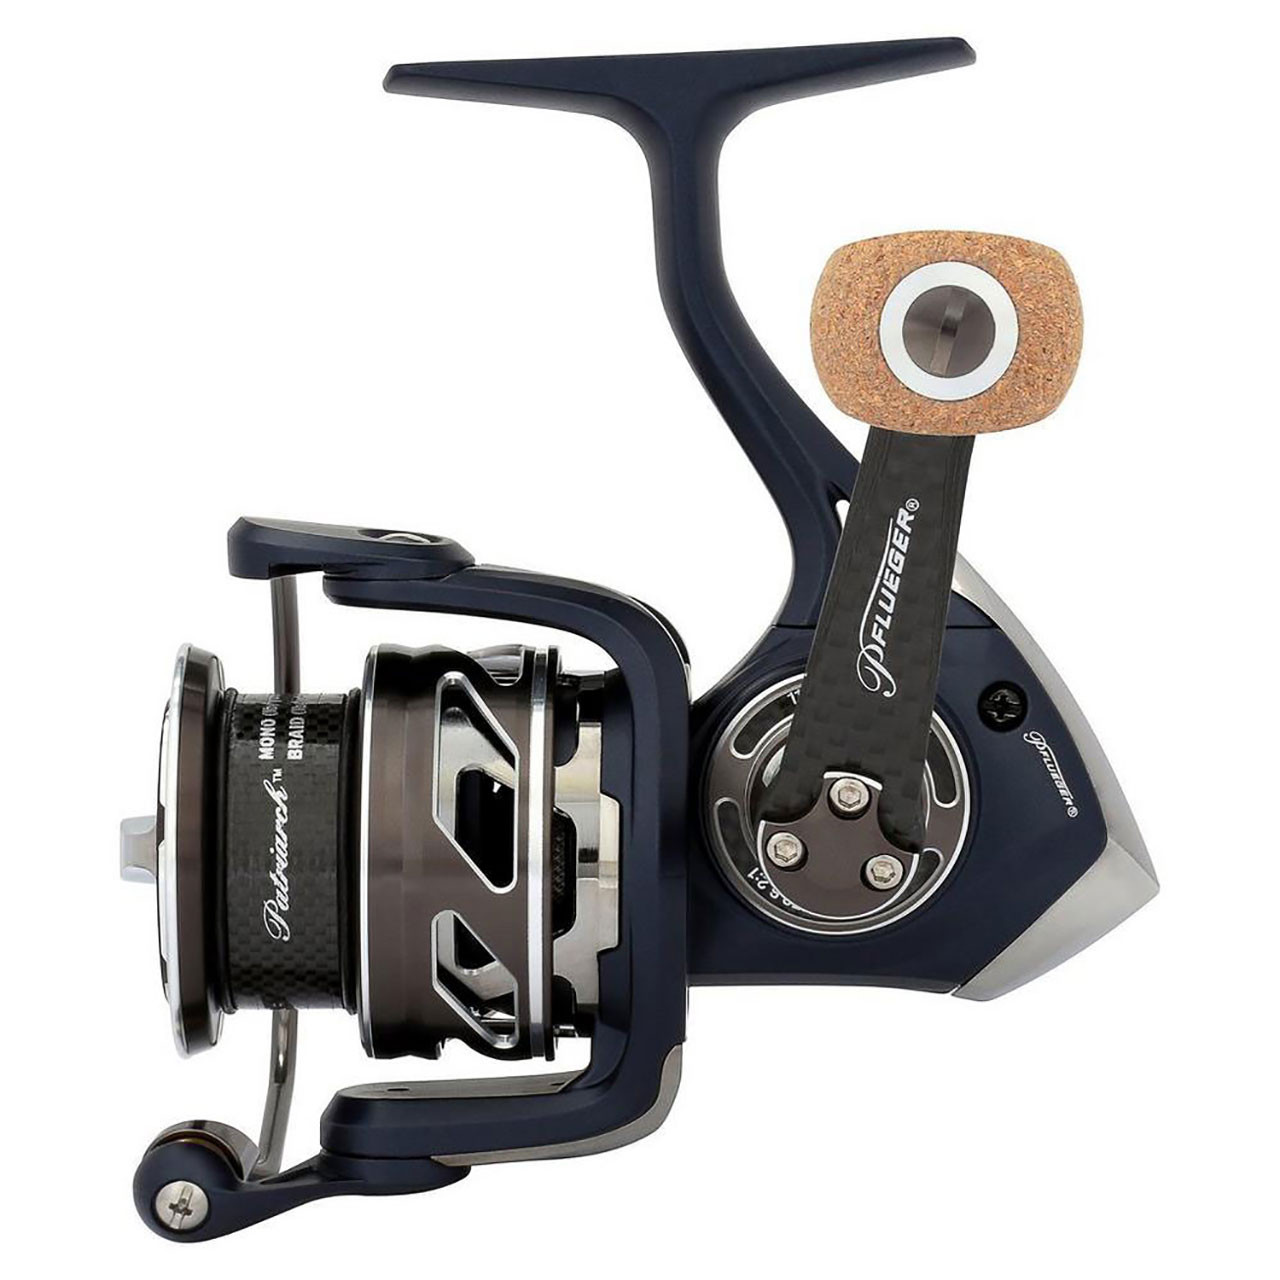 buy on sale Pflueger Supreme XT 40xt Spinning Reel with extra